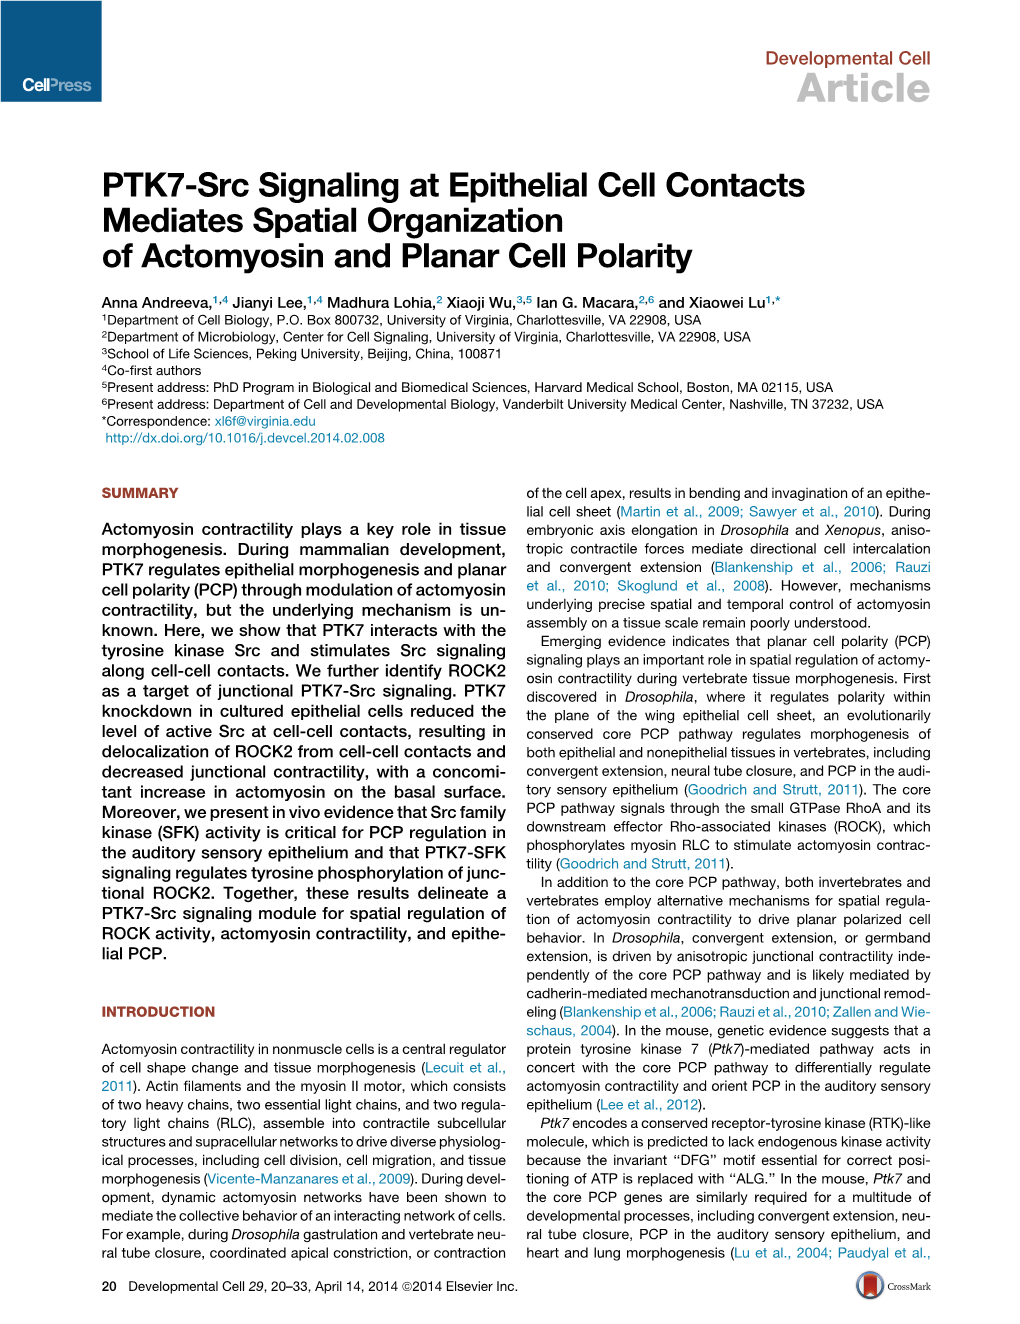 PTK7-Src Signaling at Epithelial Cell Contacts Mediates Spatial Organization of Actomyosin and Planar Cell Polarity